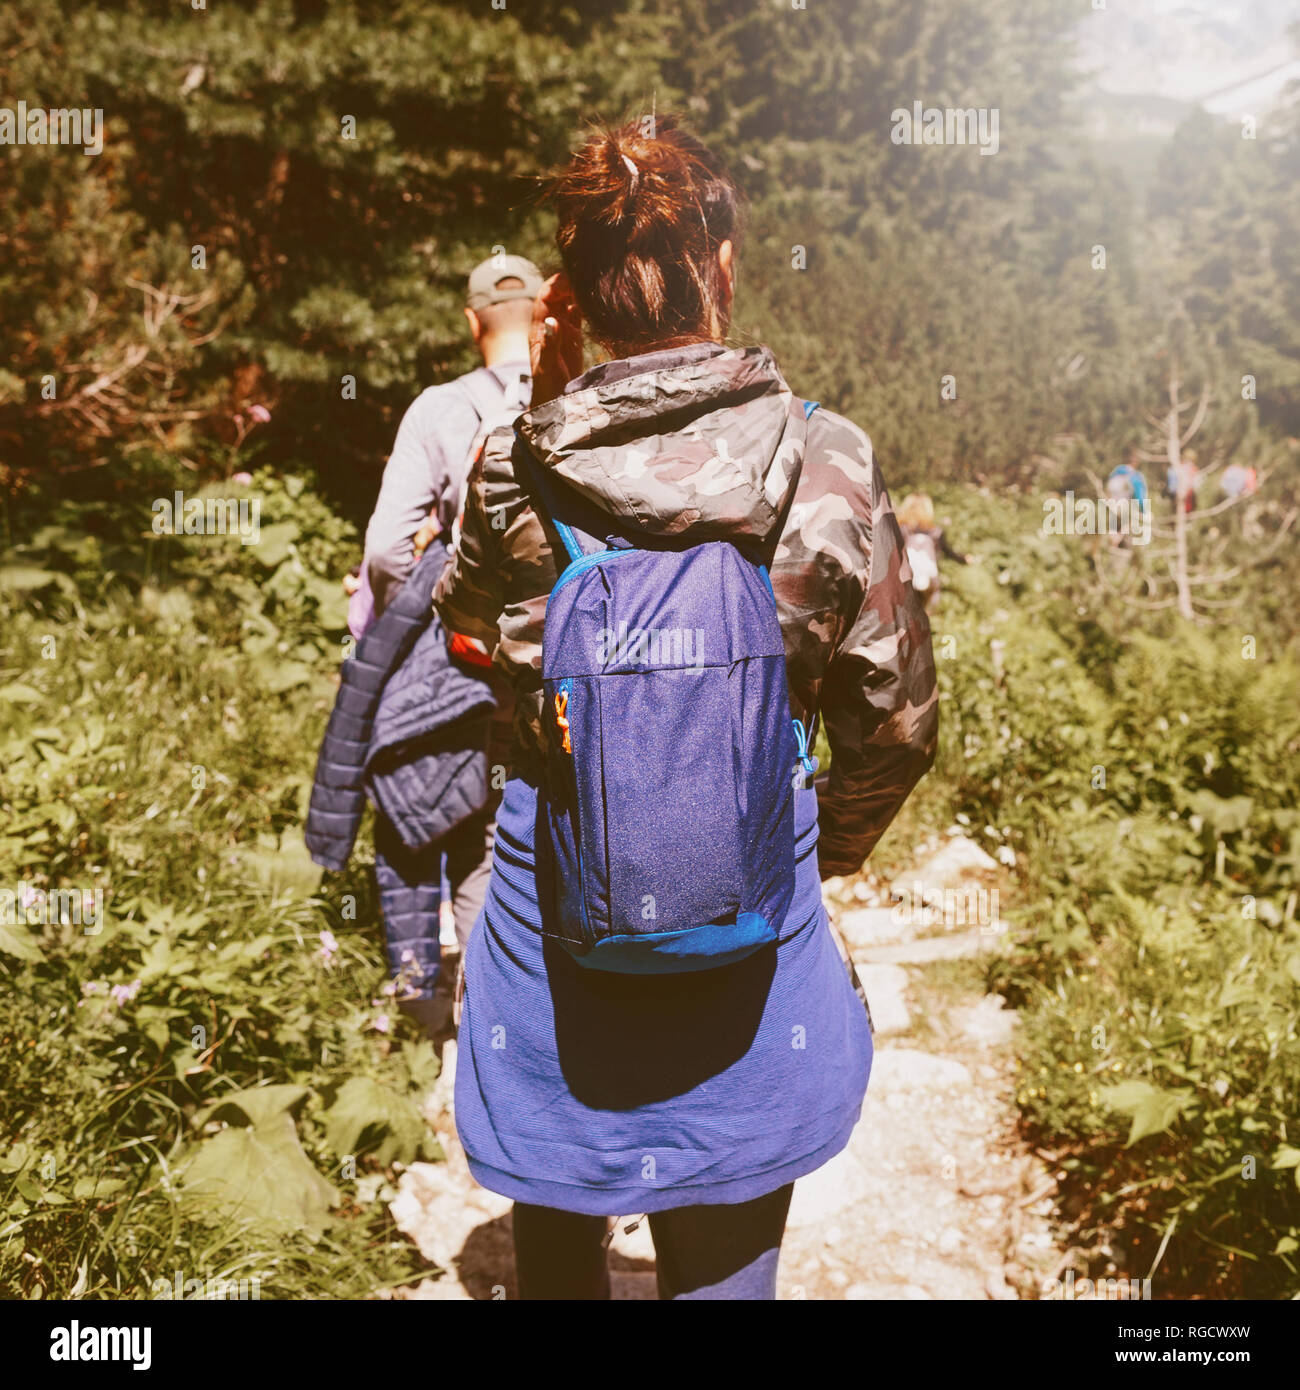 Group of traveler with backpack walking forest. Travel and backpacking lifestyle concept Stock Photo